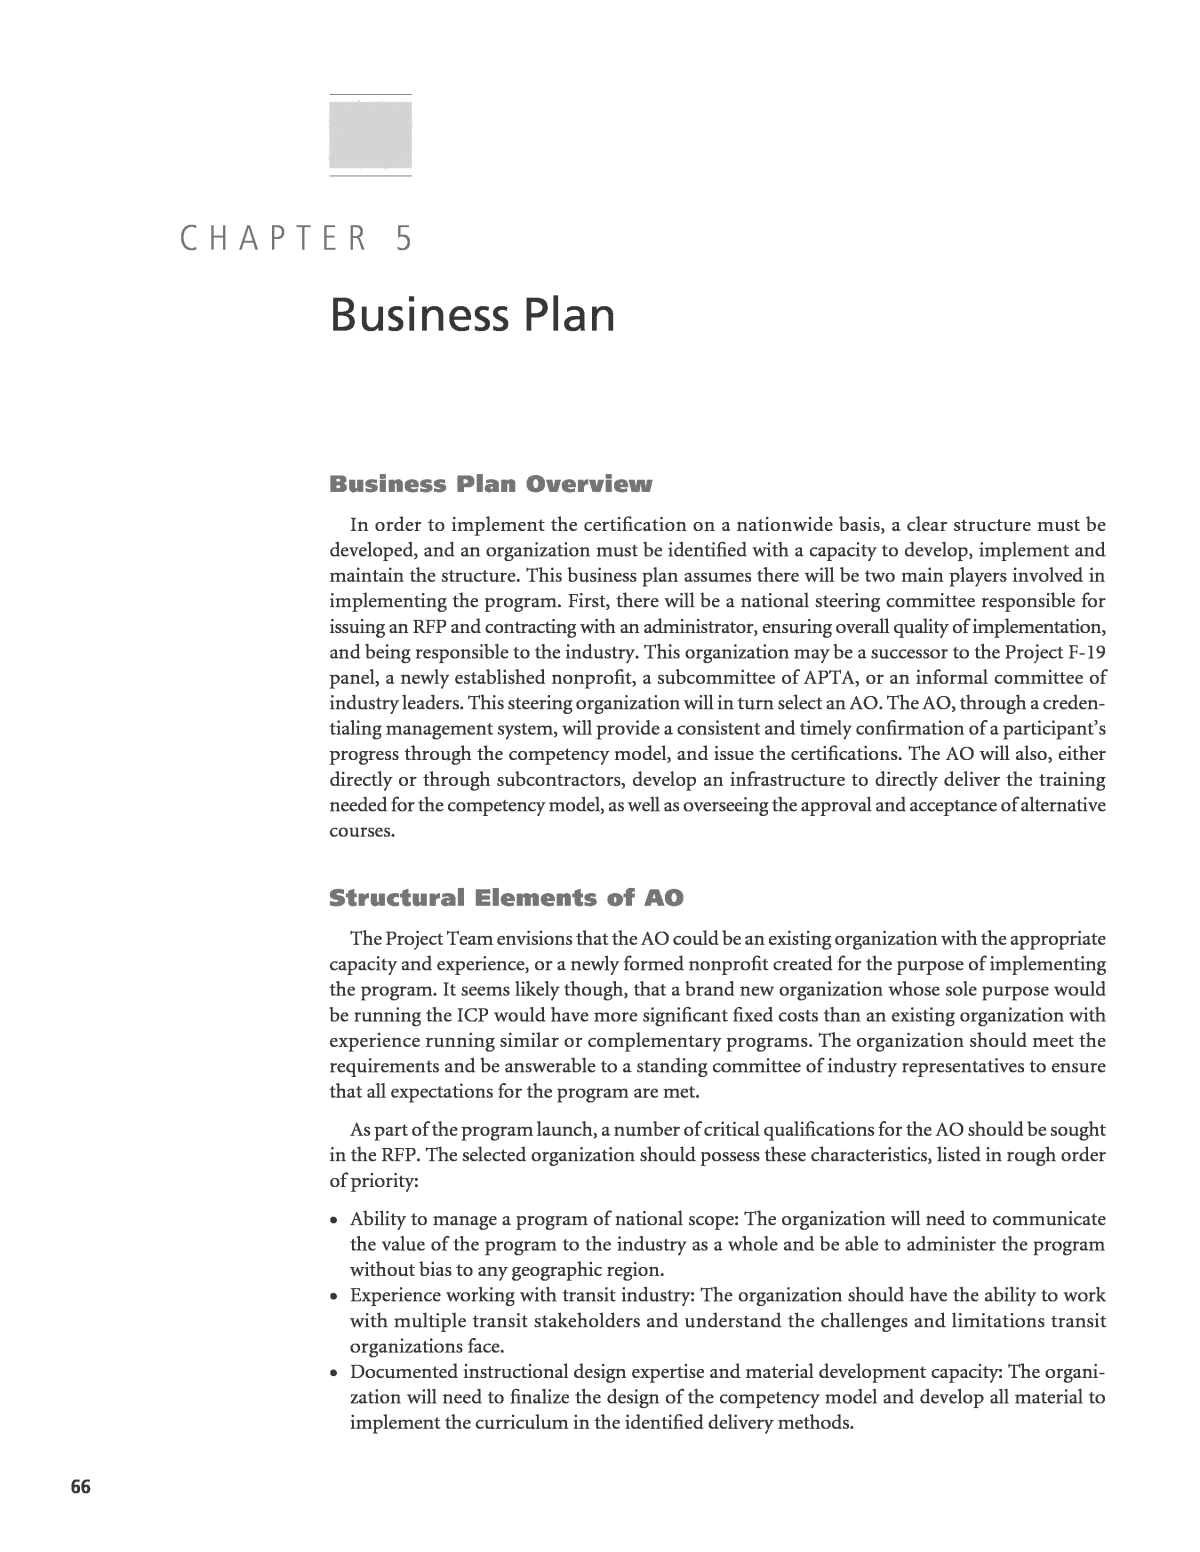 sample of chapter 5 business plan